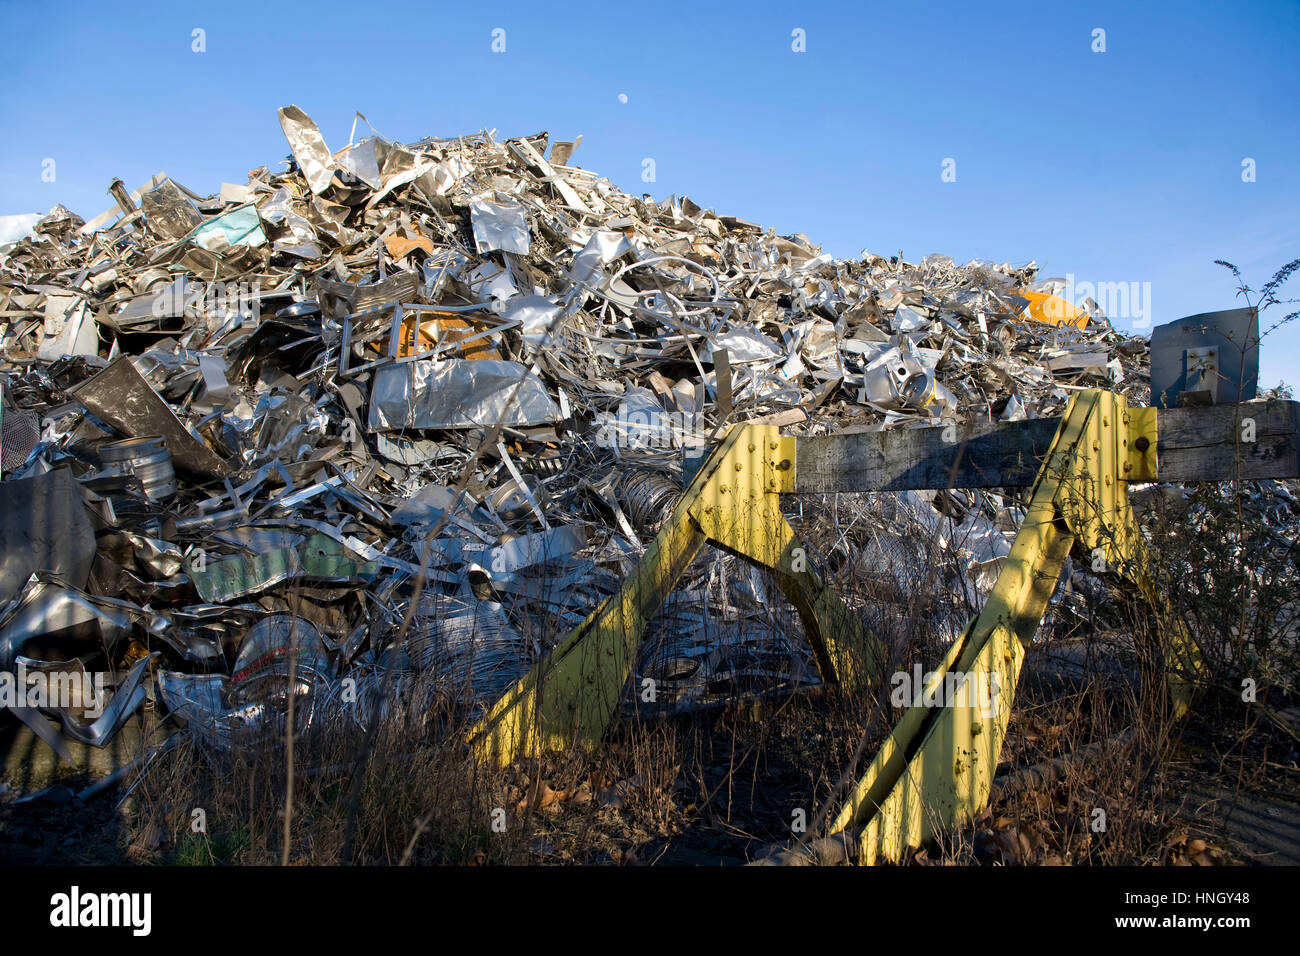 Germany, Ruhr Area, Dortmund, the harbor at the Dortmund-Ems-Canal, scrap yard with old metal. Stock Photo